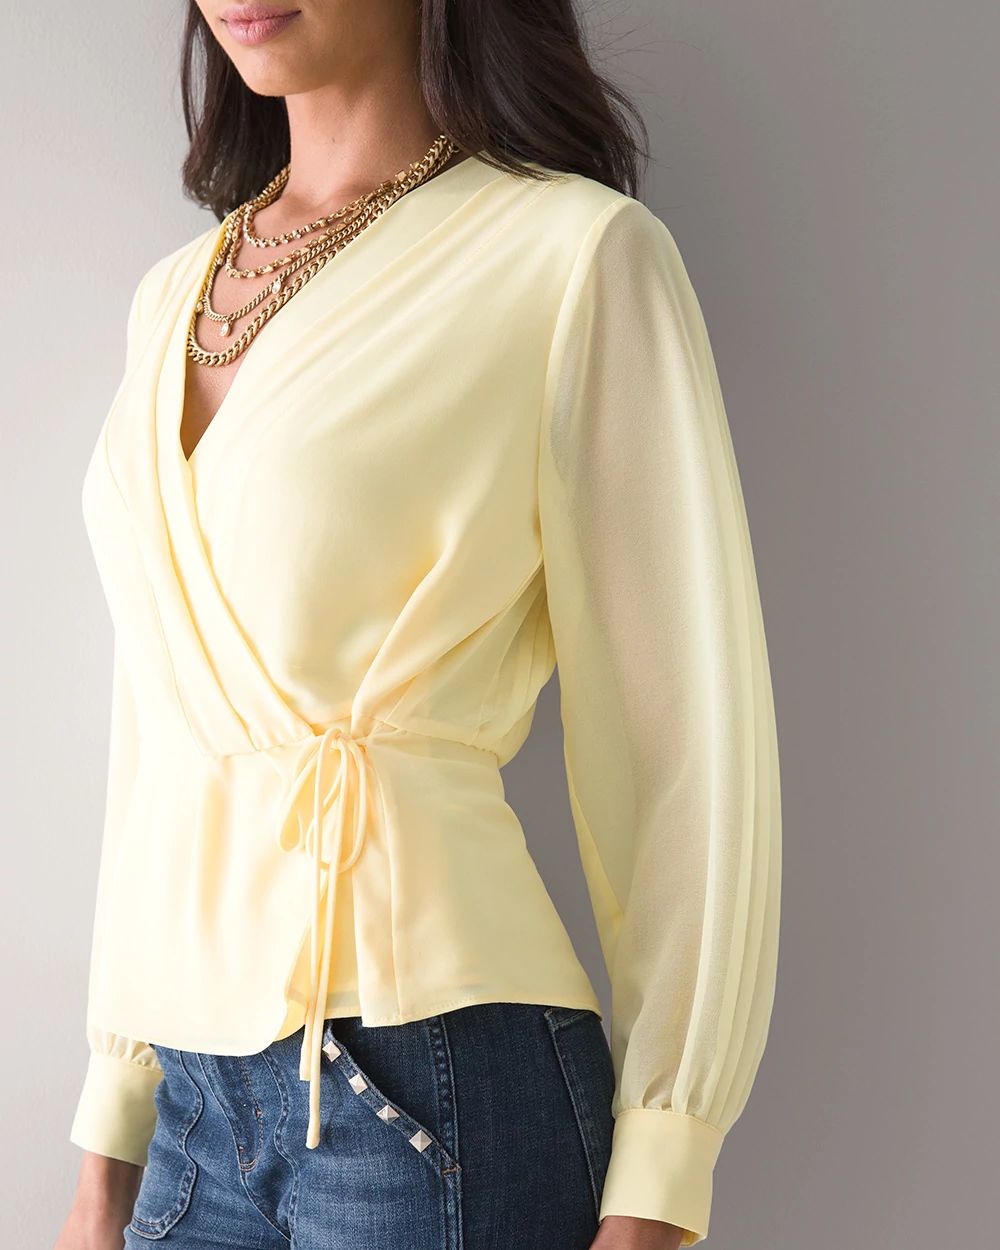 Long-Sleeve Pleat-Back Surplice Blouse click to view larger image.